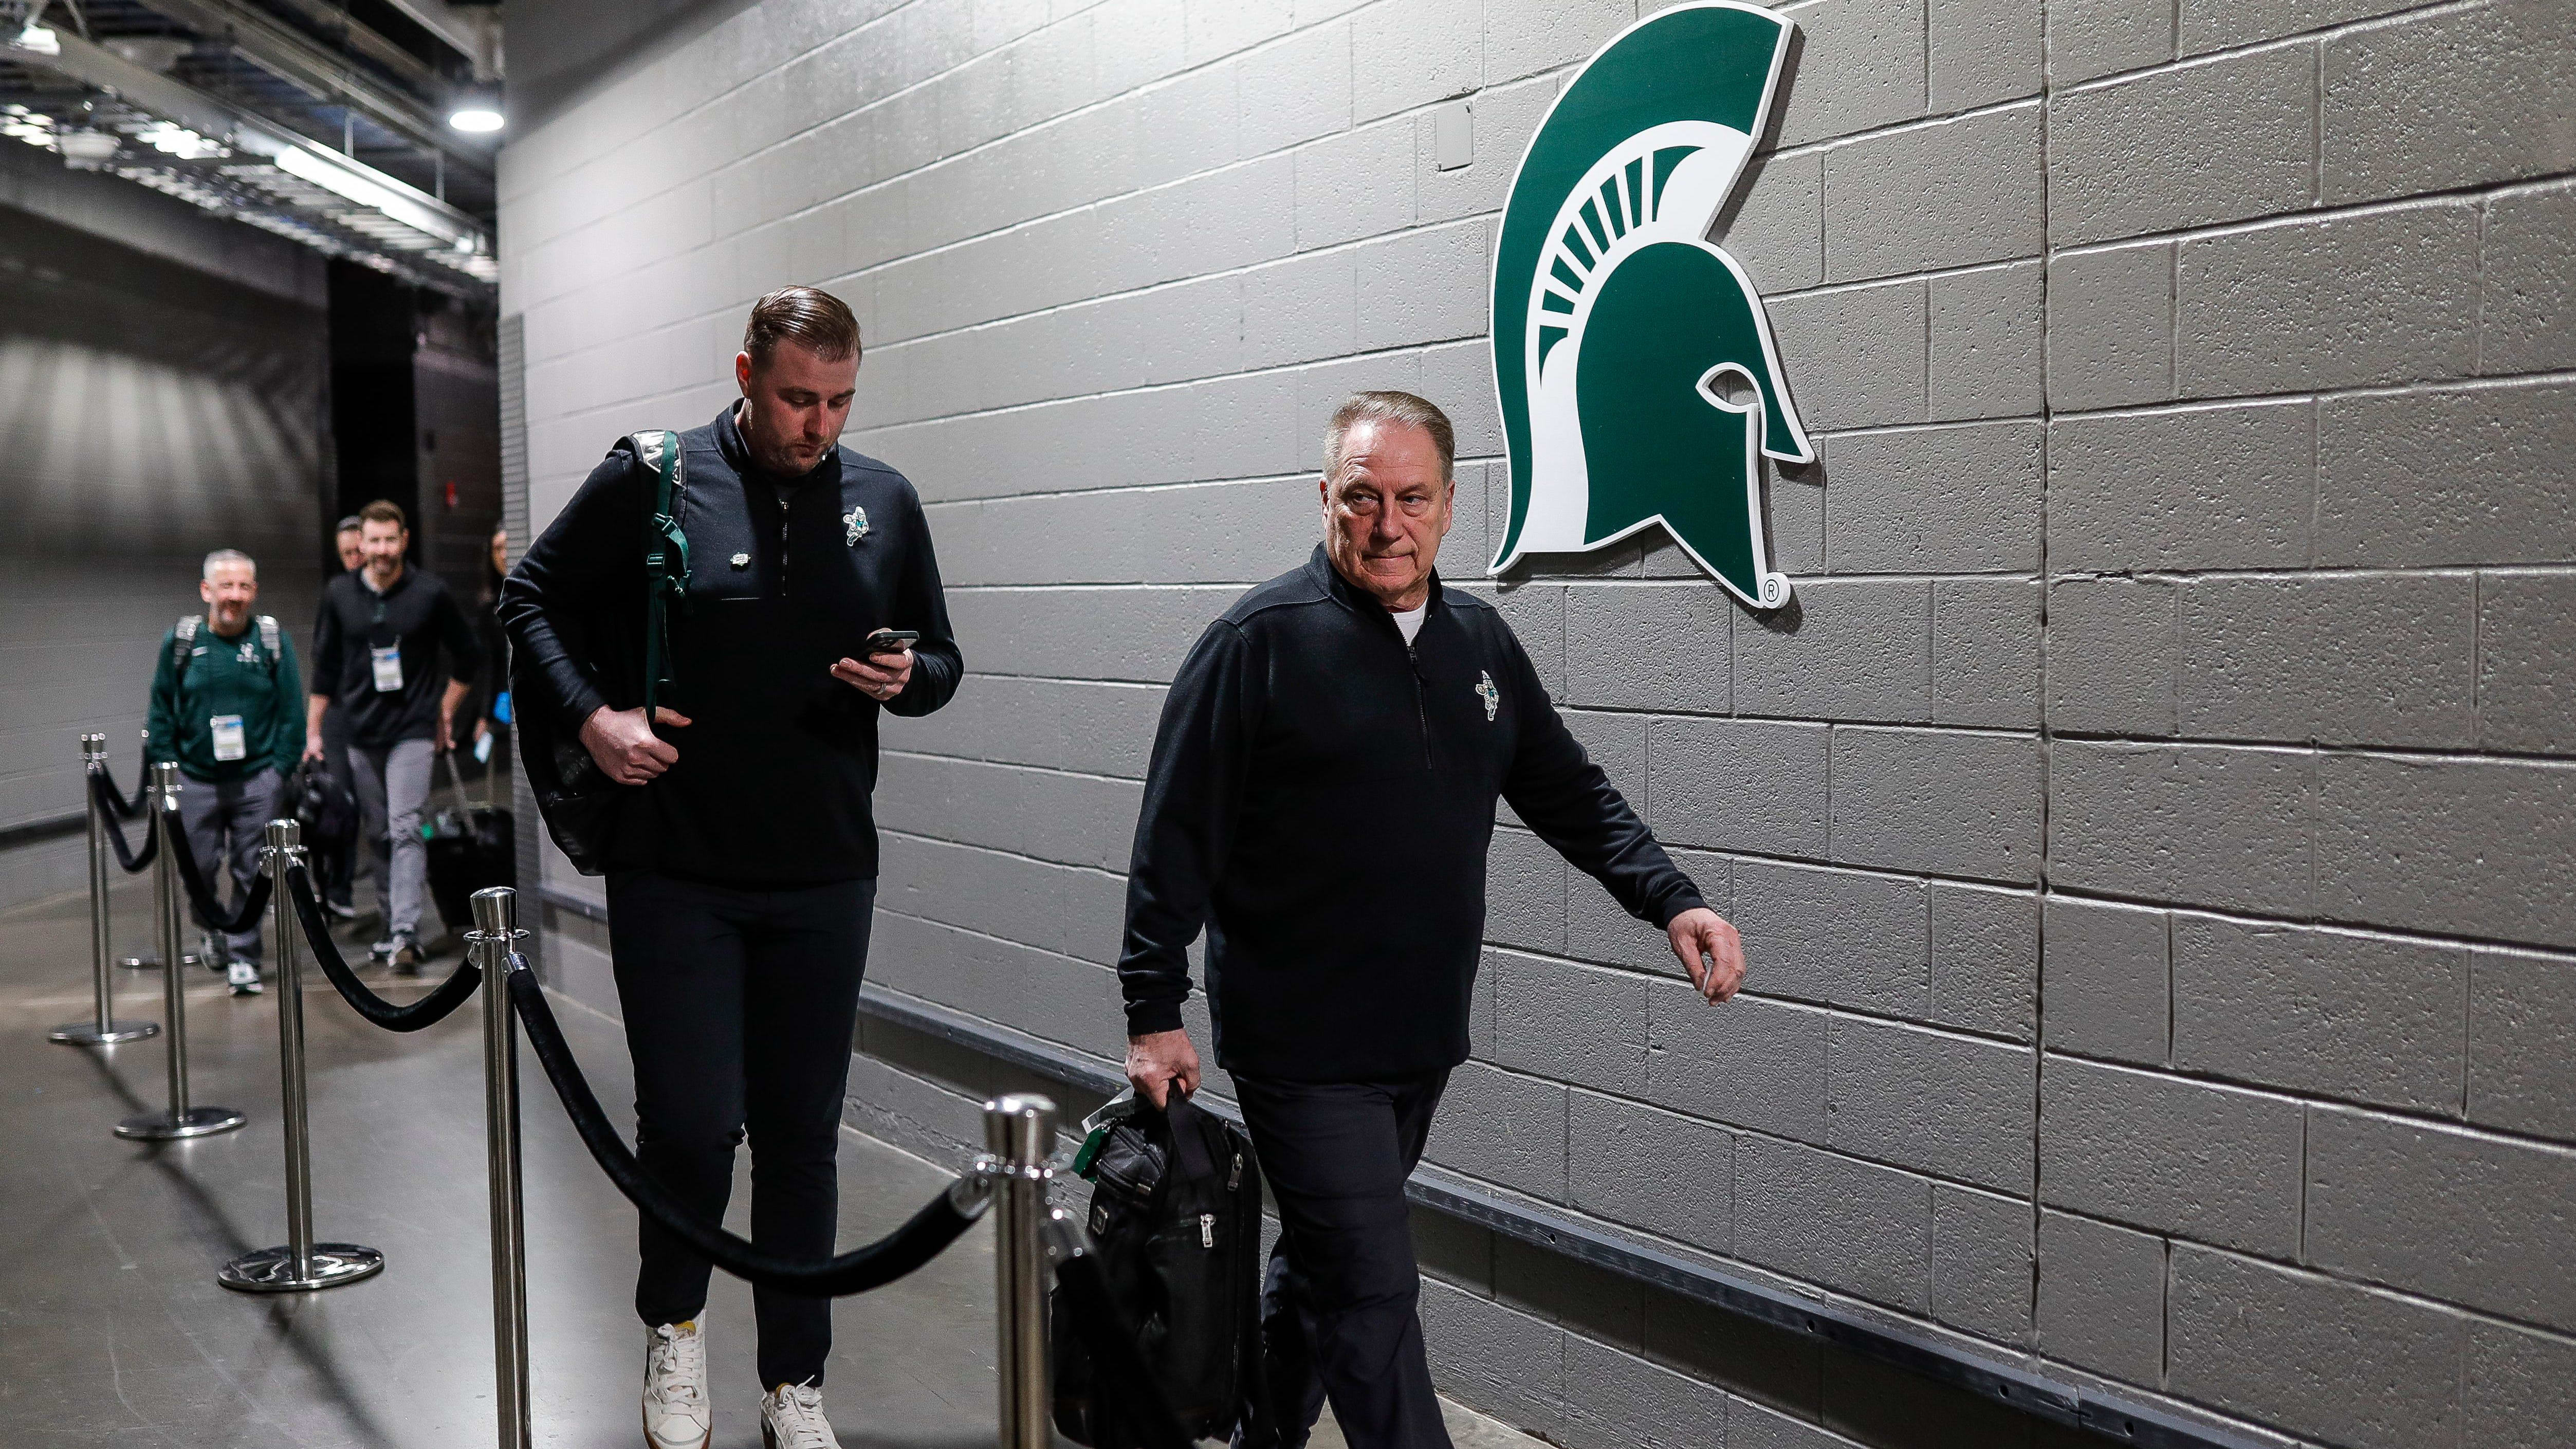 Michigan State Tom Izzo Football Building: Donor Contributions and High-Tech Features Spotlighted